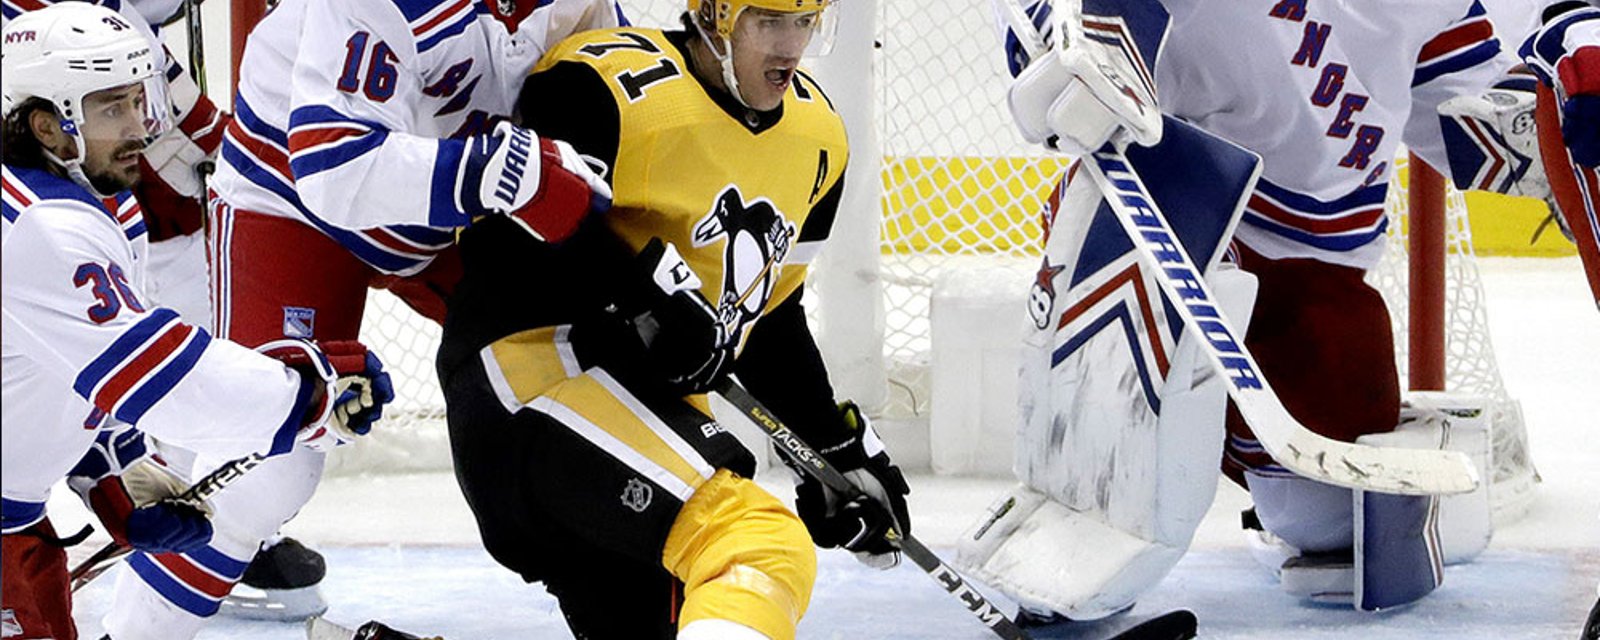 Penguins rocked by injuries, Malkin out long-term